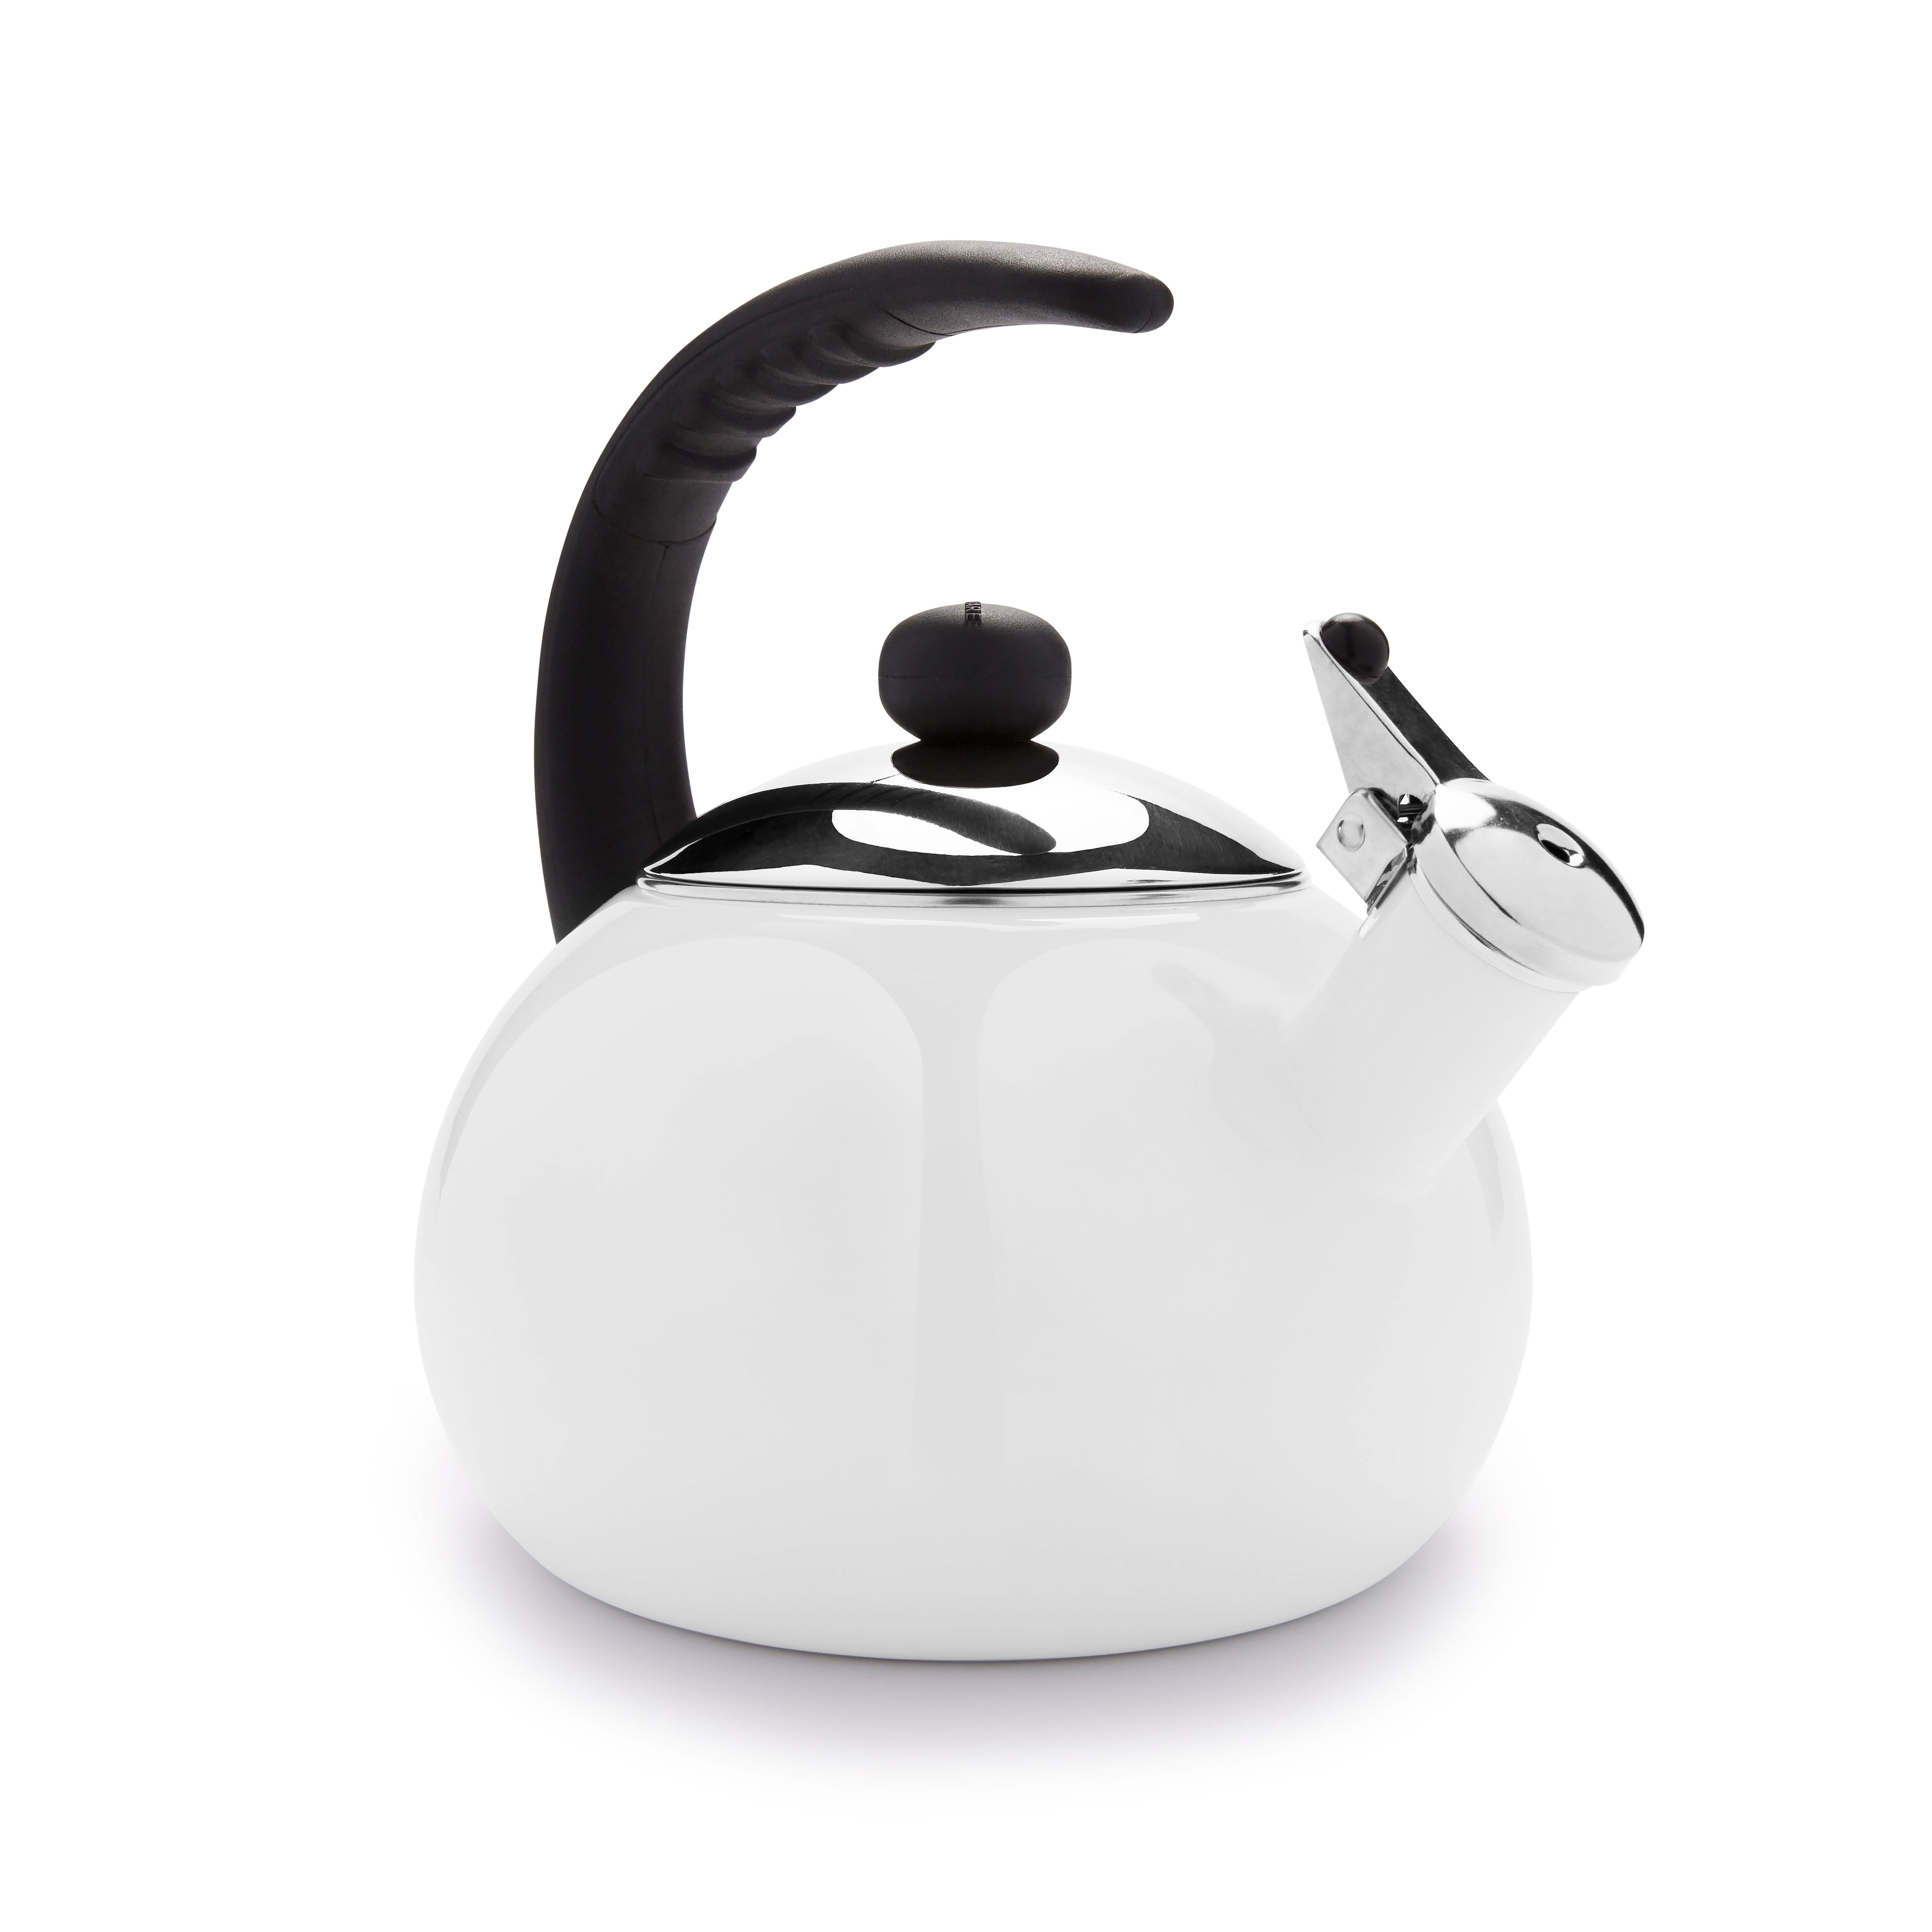  Farberware Dome Tea Kettle, Whistling Teapot, Porcelain Enamel  on Carbon Steel, BPA-Free, Rust-Proof, Cool Handle, 3 qt, 12 Cup Capacity,  Red: Home & Kitchen